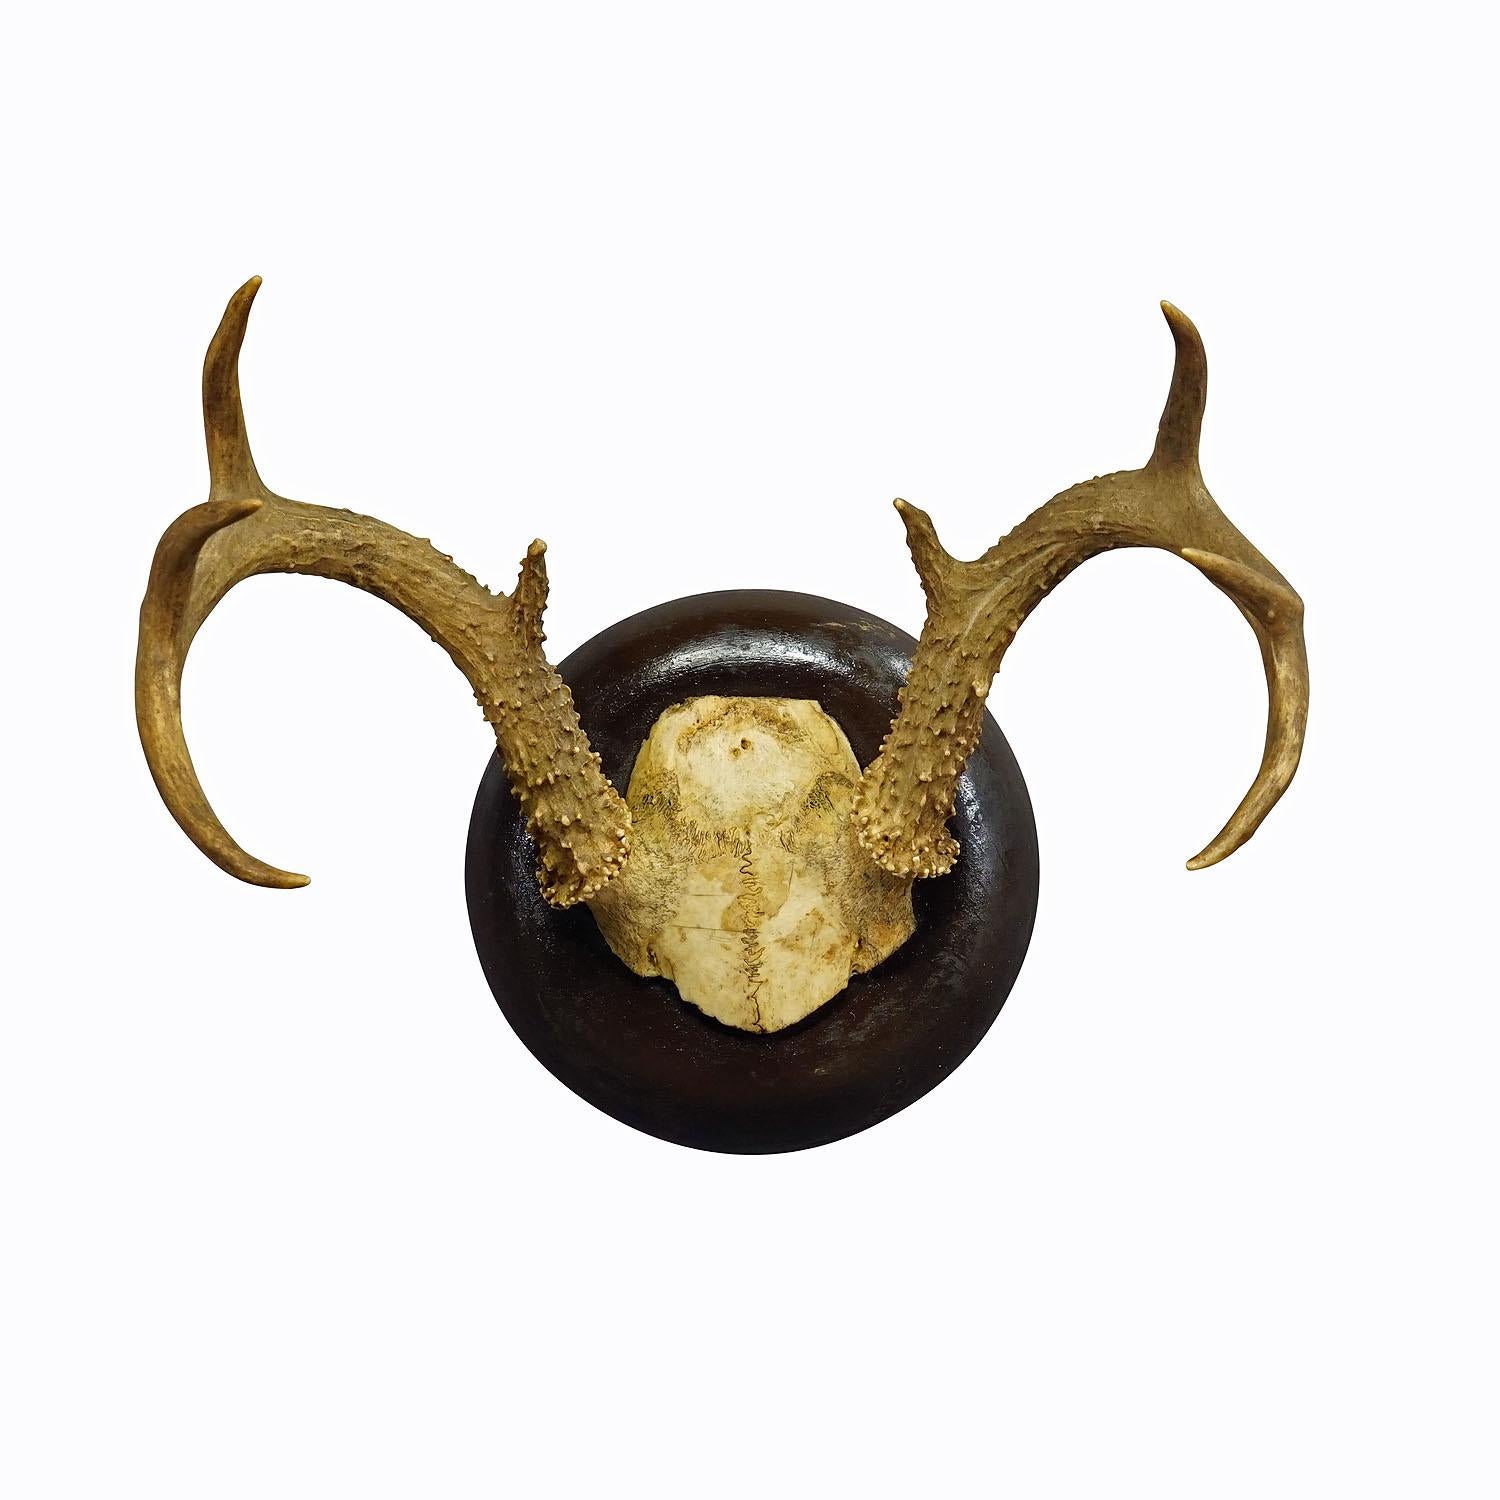 White Tailed Deer Trophy Mount on Wooden Plaque ca. 1900s
Item e6943
A lovely antique white tailed deer (Odocoileus virginianus) trophy on a wooden plaque with dark finish. The trophy was shot in the late 19th century. 

Trophies are mementos from